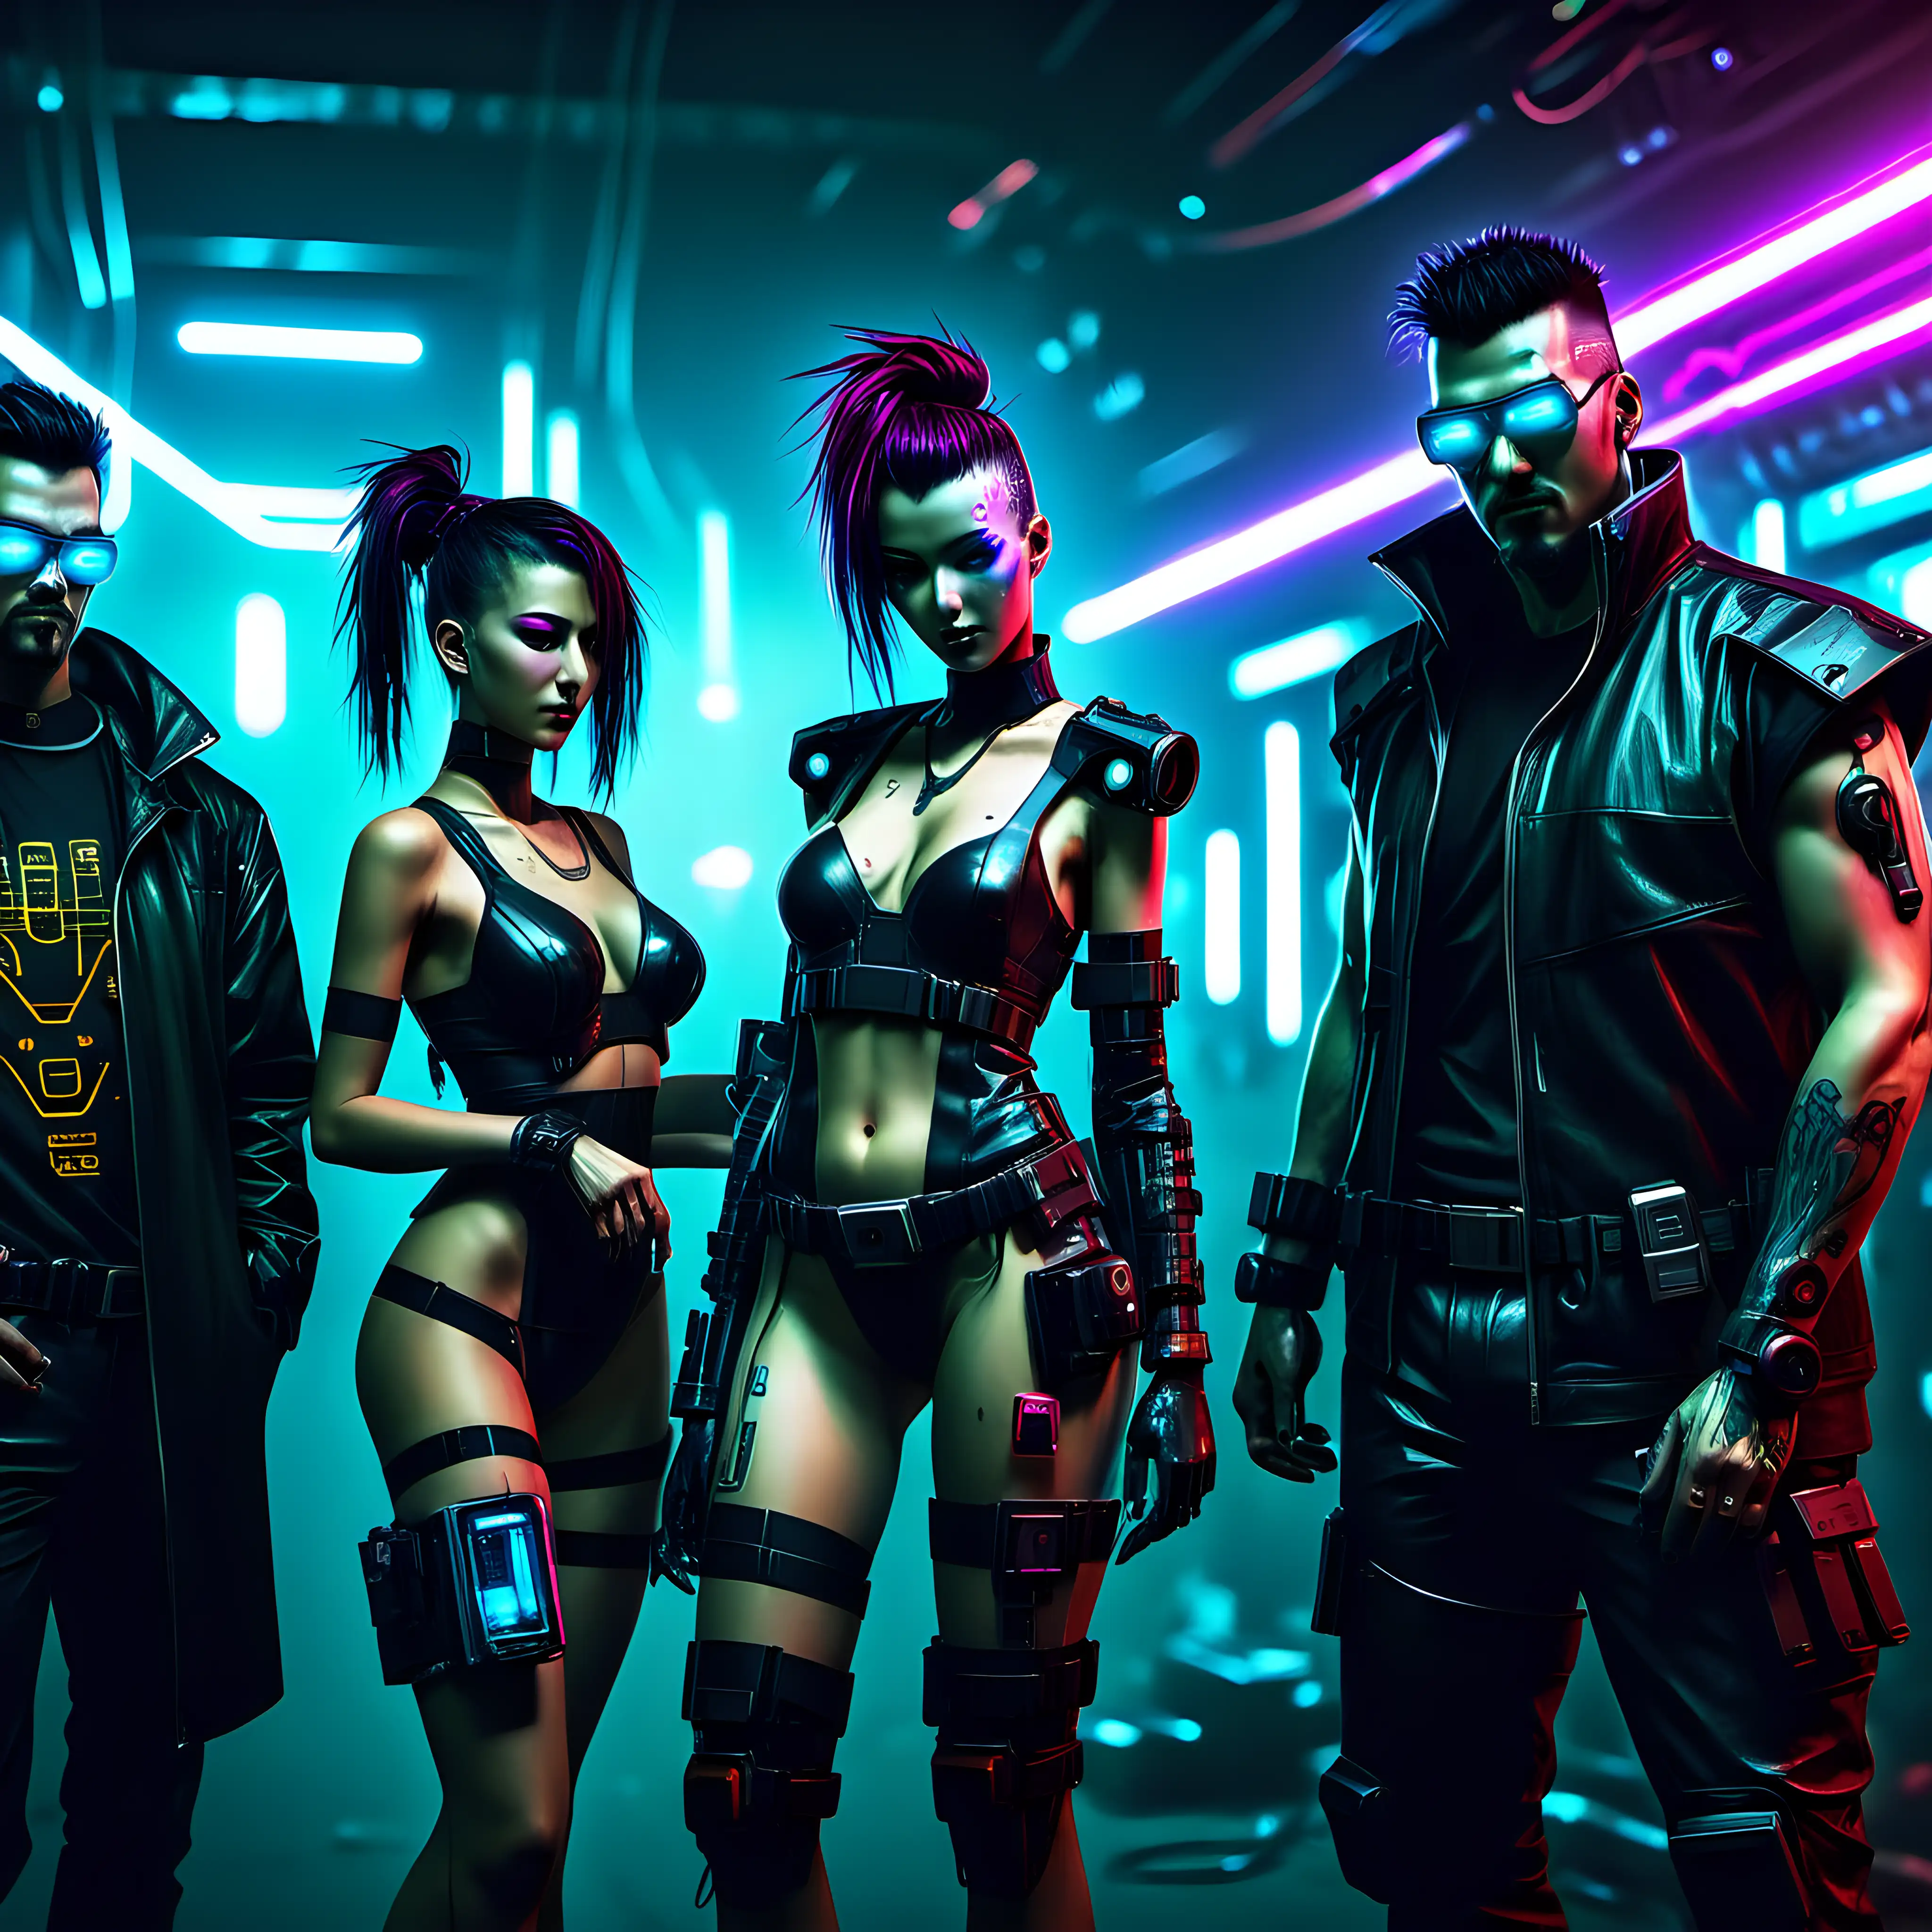 Futuristic Cyberpunk Party with Neon Lights and HighTech Vibes